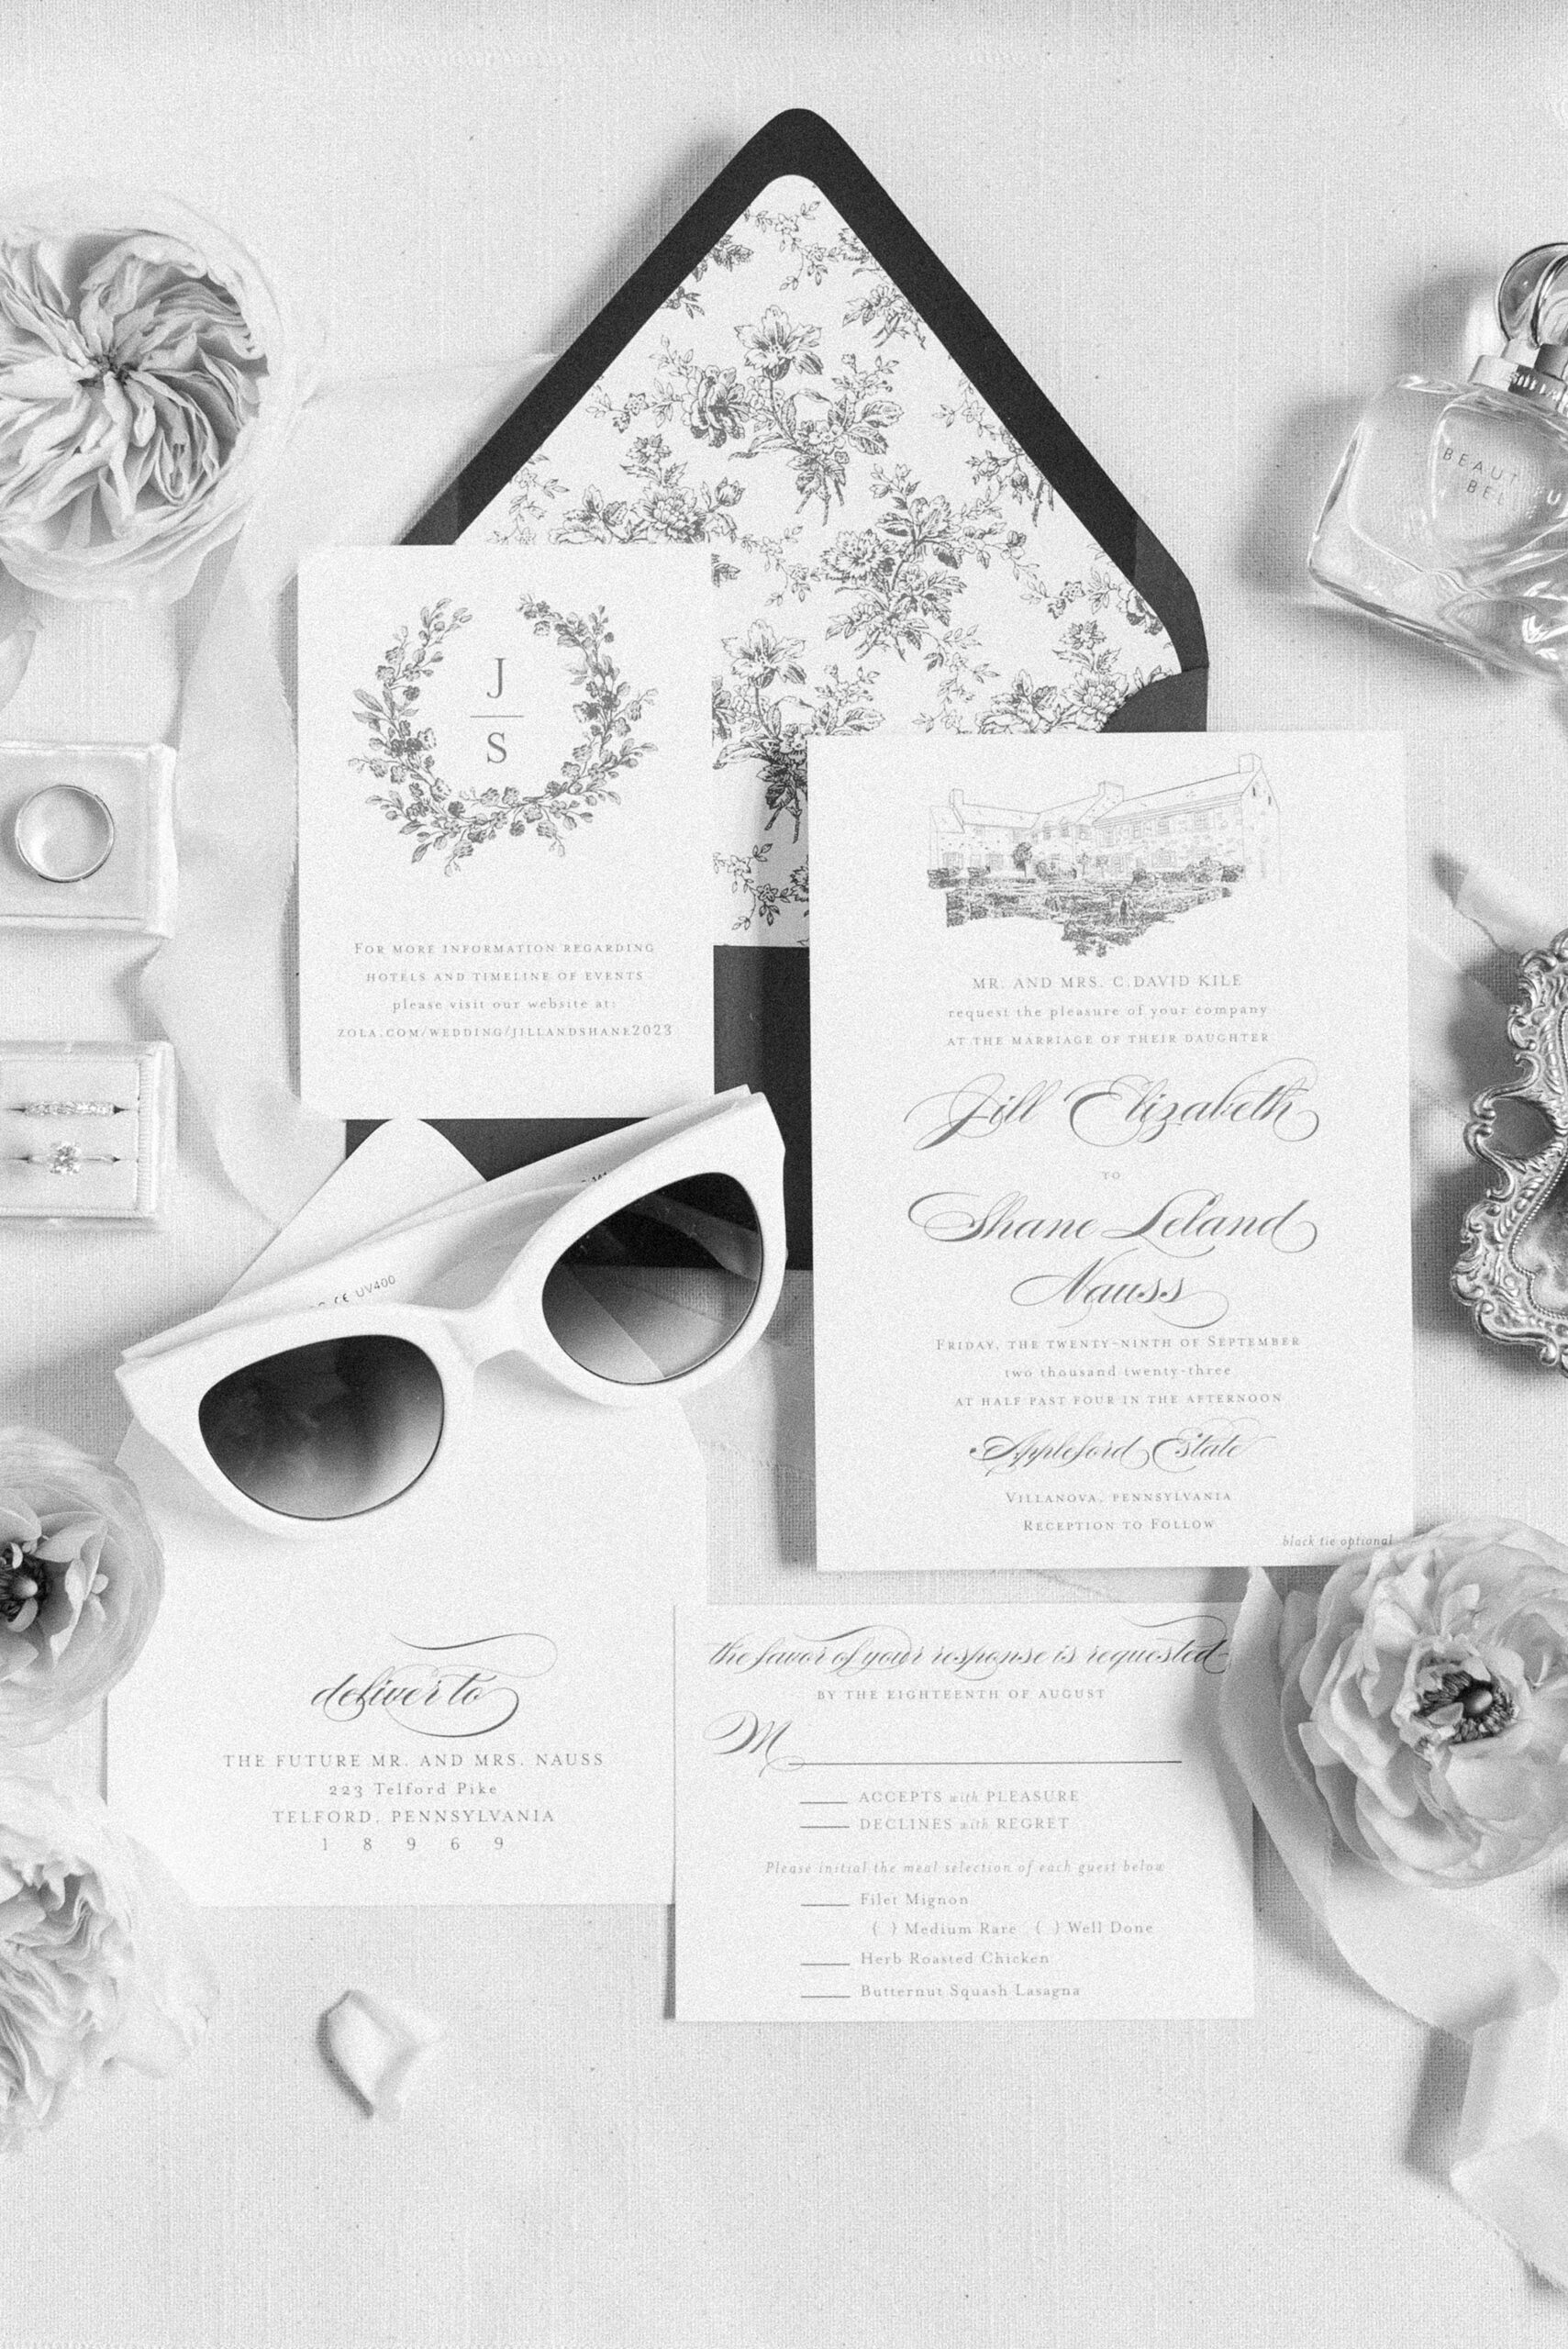 Bridal details including invitations and sunglasses sit on a table with flowers